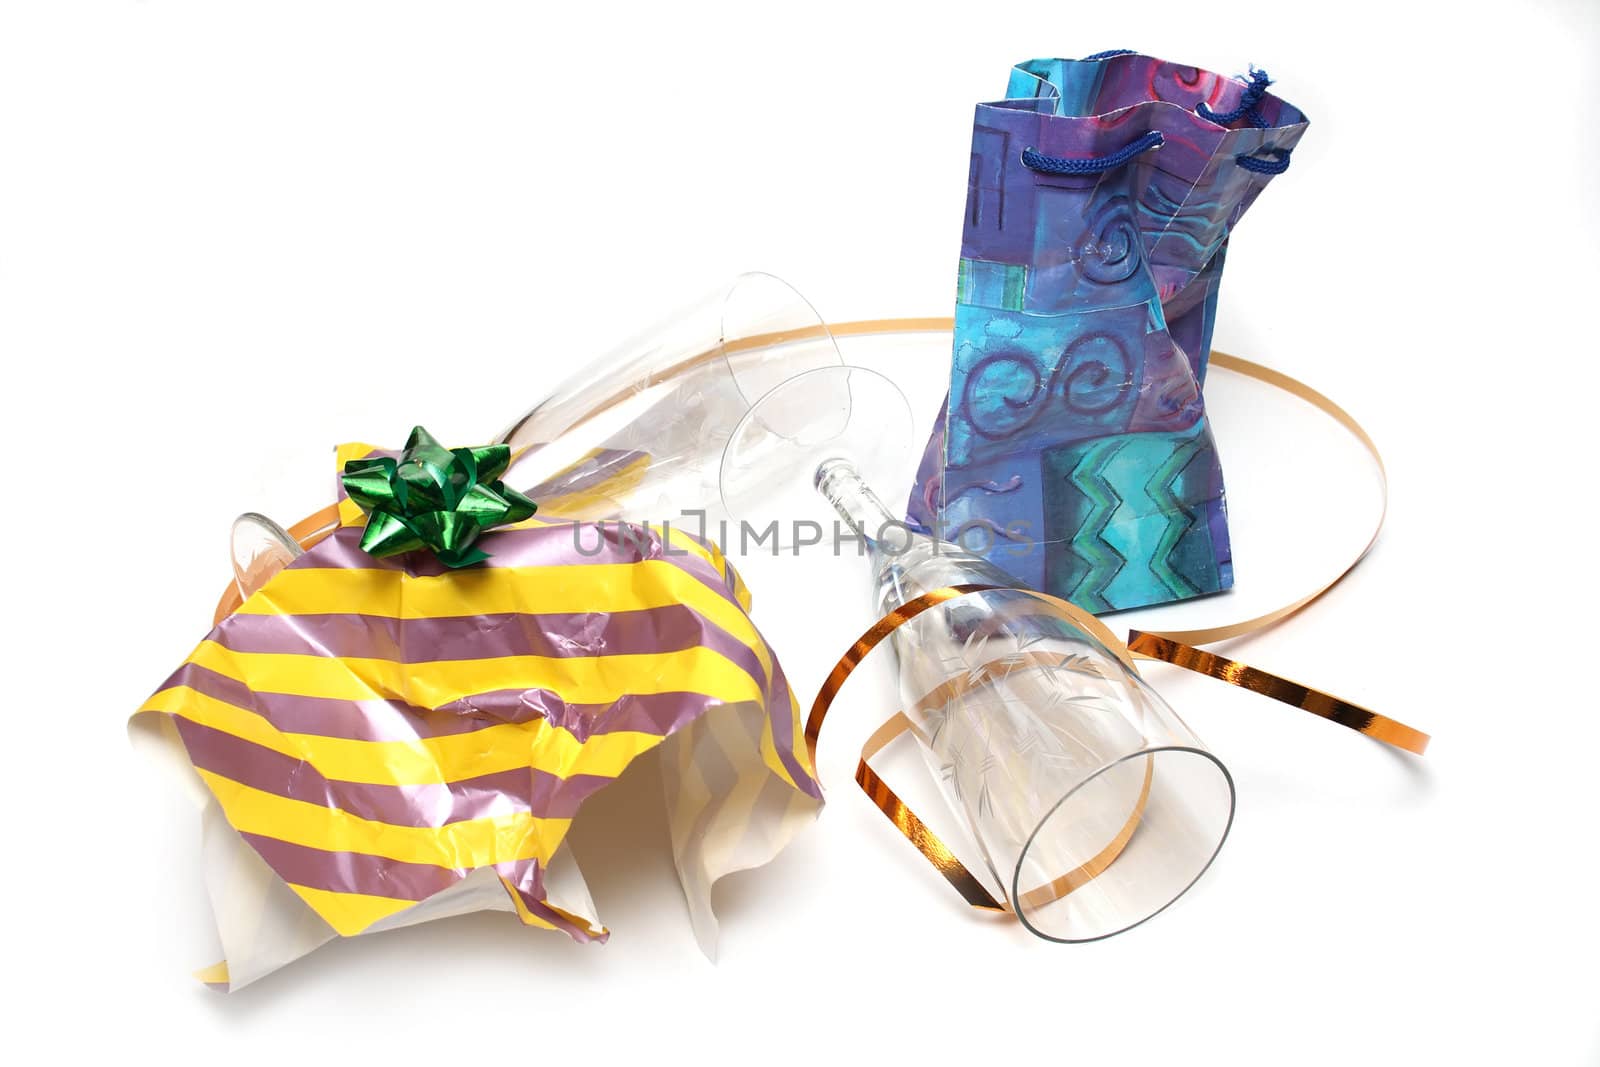 Crumpled wrapping and empty glasses by Gdolgikh